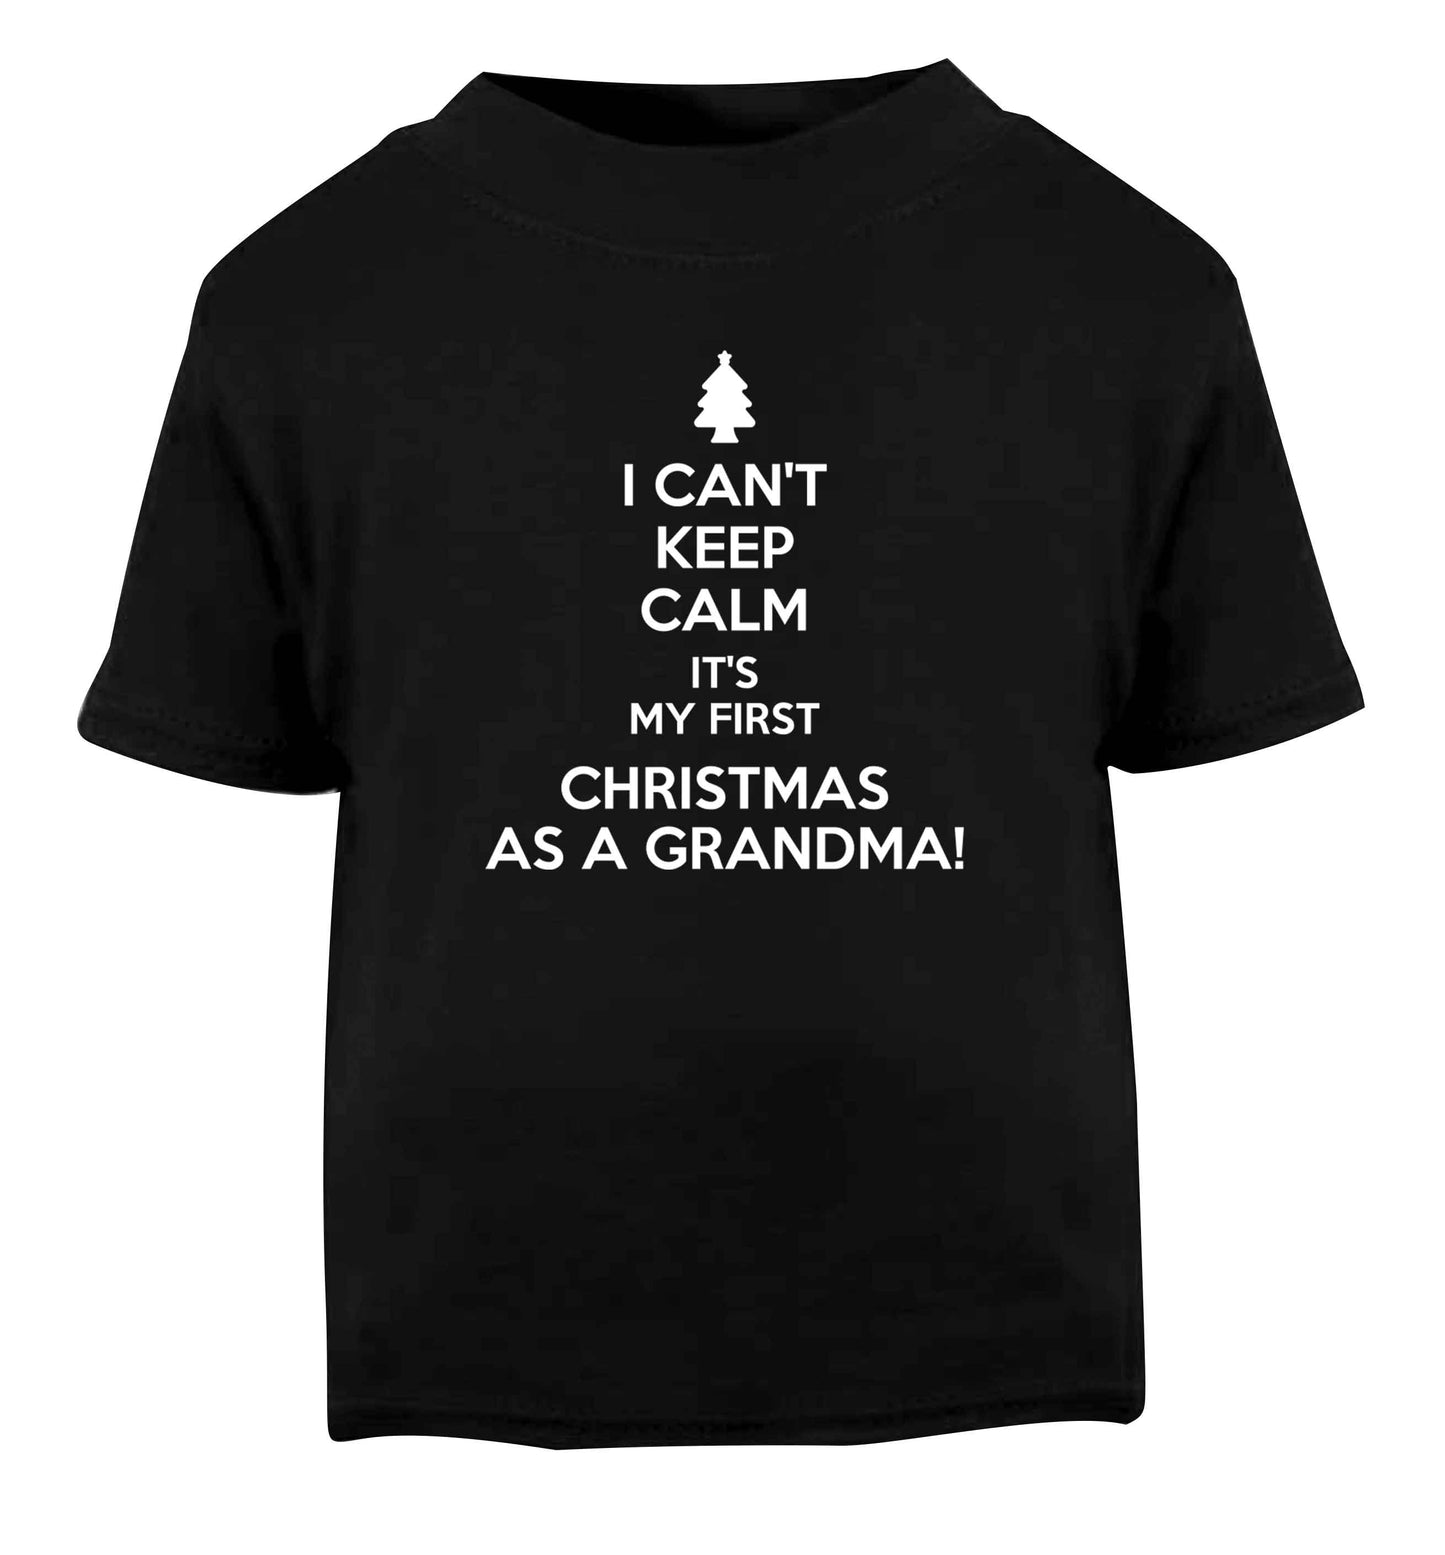 I can't keep calm it's my first Christmas as a grandma! Black Baby Toddler Tshirt 2 years